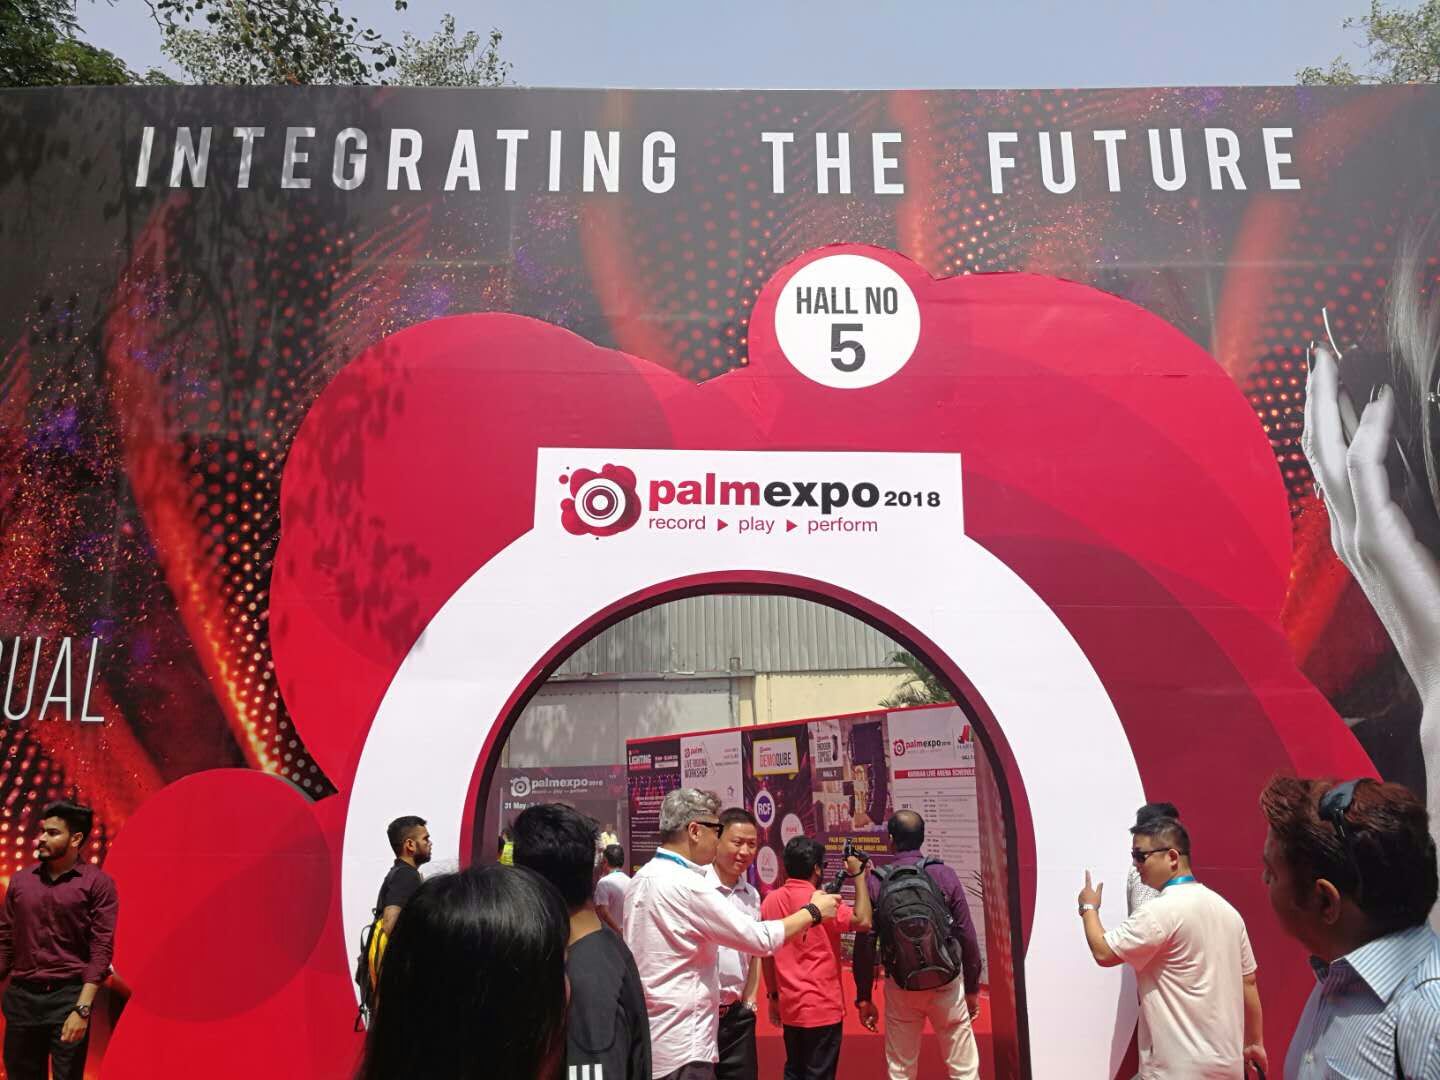 Palm expo 2018 in India